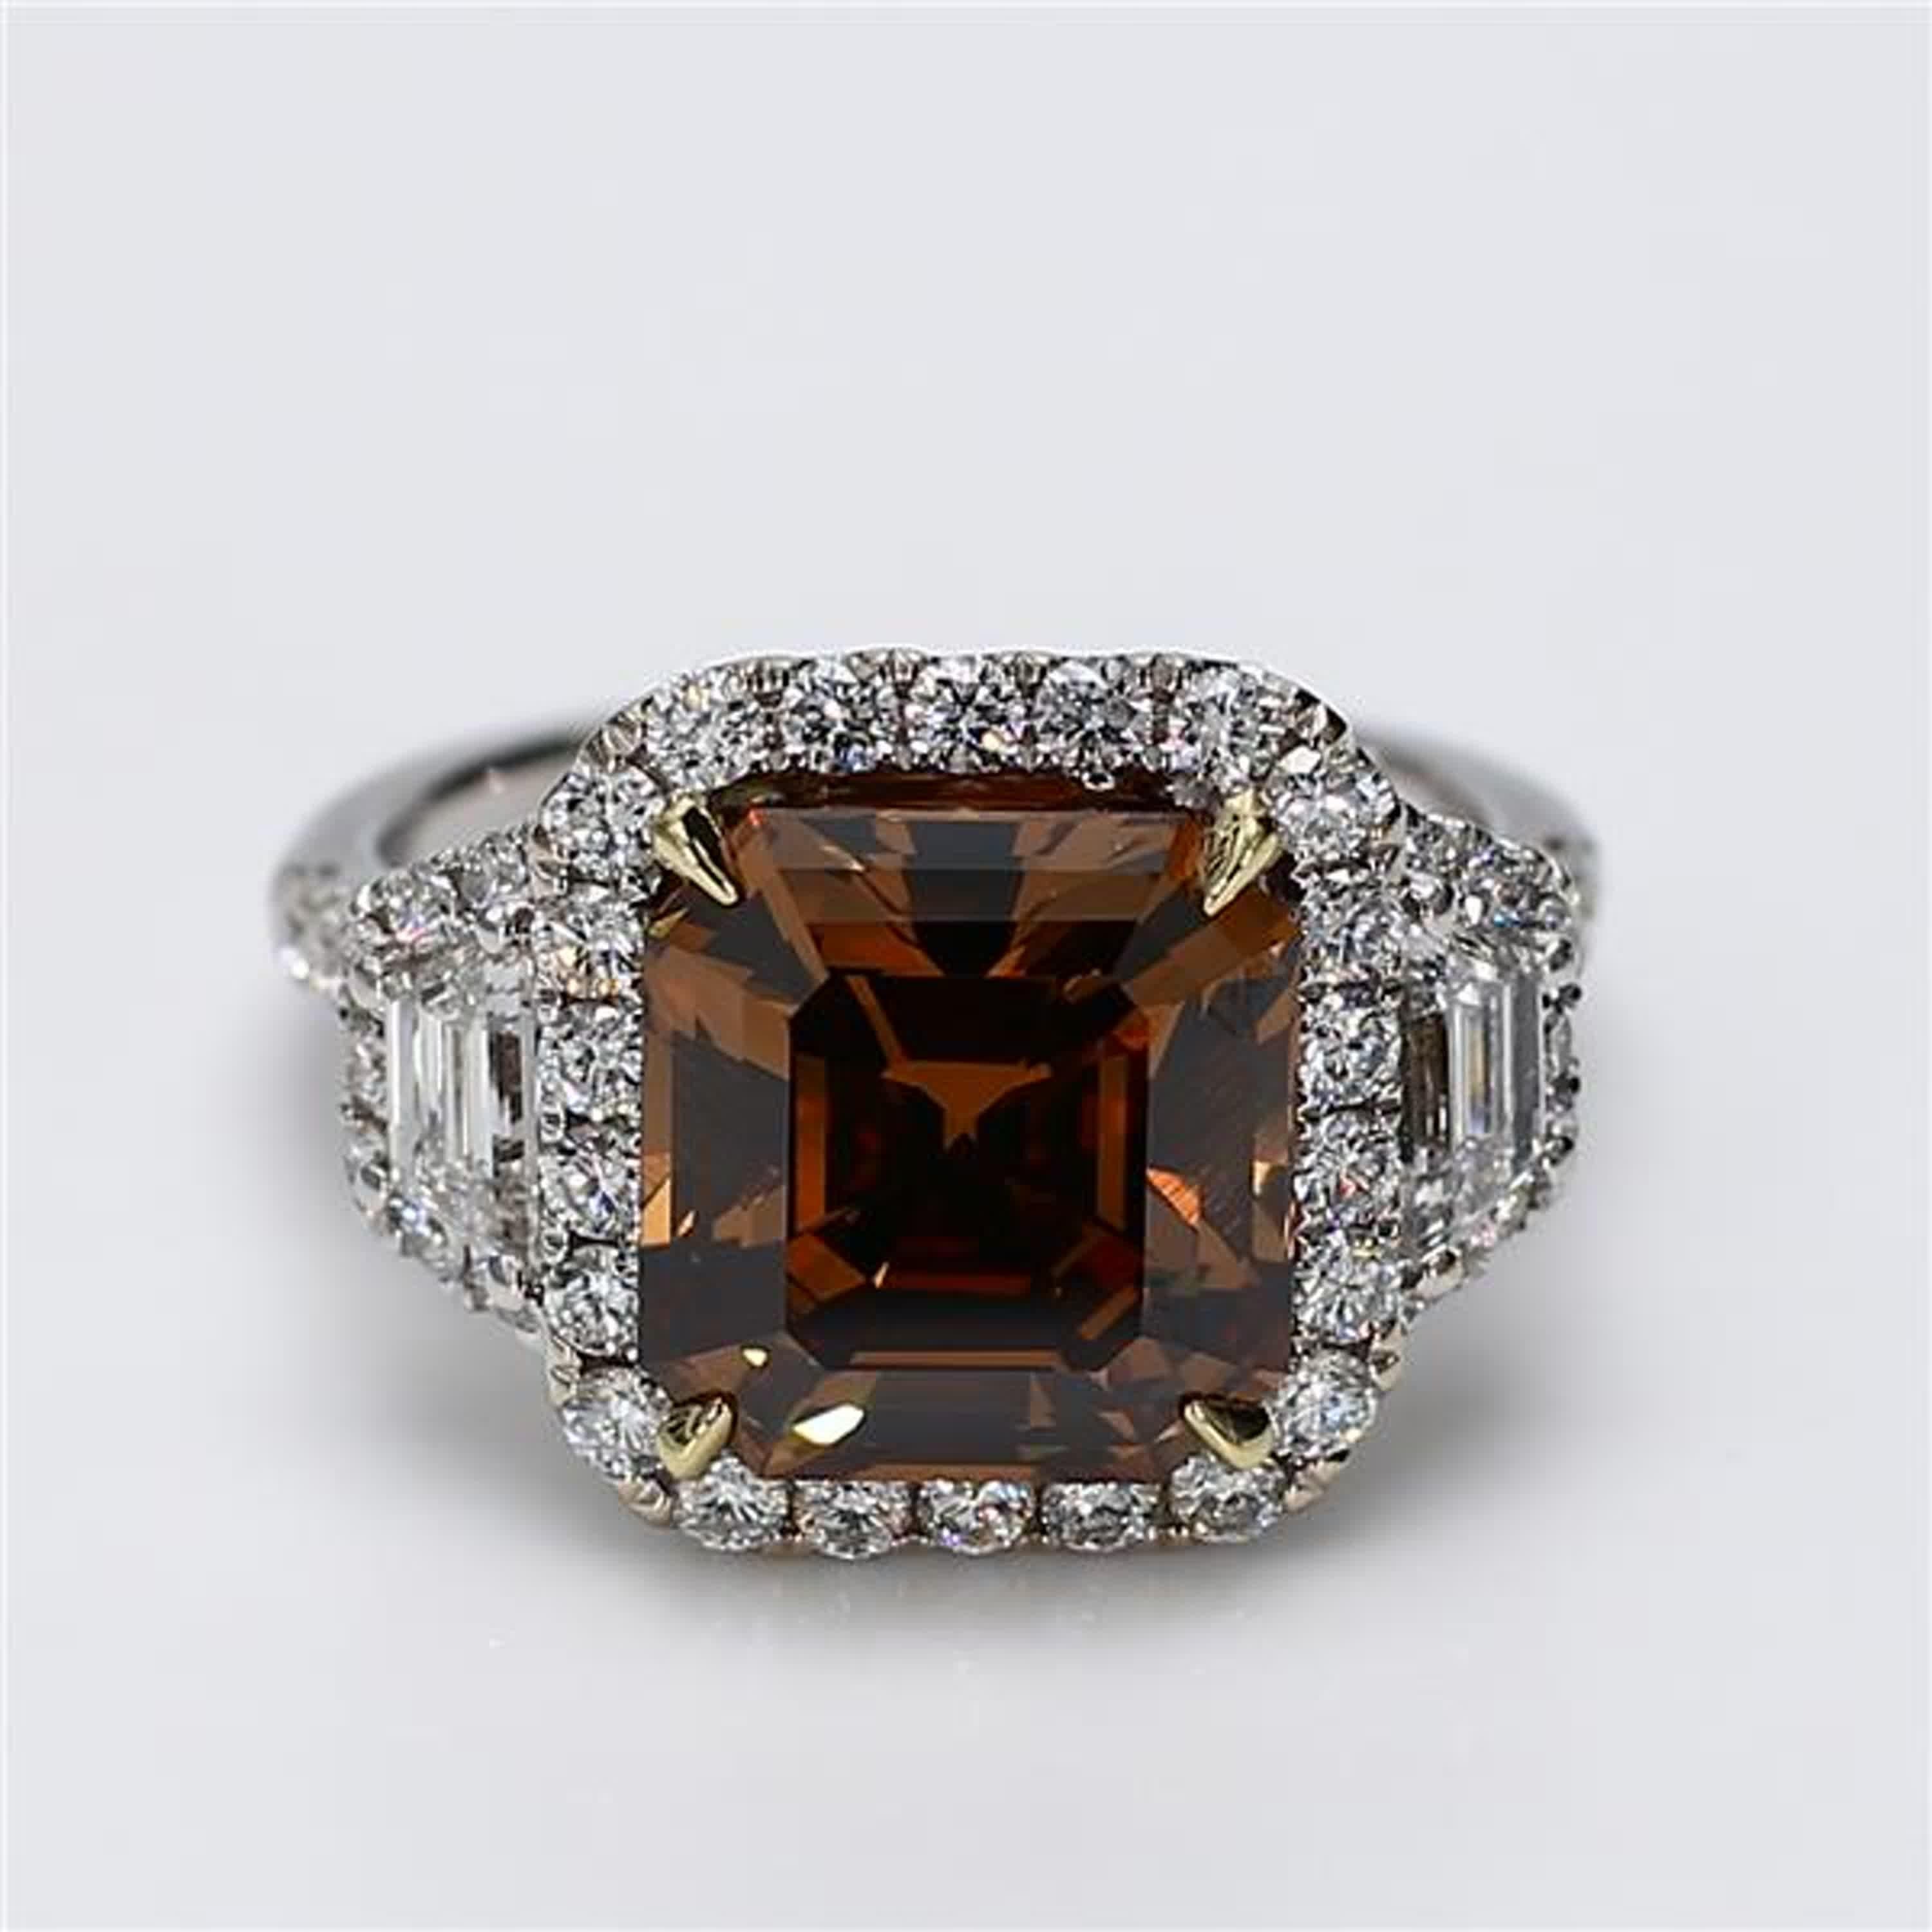 RareGemWorld's classic GIA certified diamond ring. Mounted in a beautiful 18K Yellow and White Gold setting with a natural emerald cut brown diamond. The brown diamond is surrounded by natural trapezoid cut white diamonds and round natural white